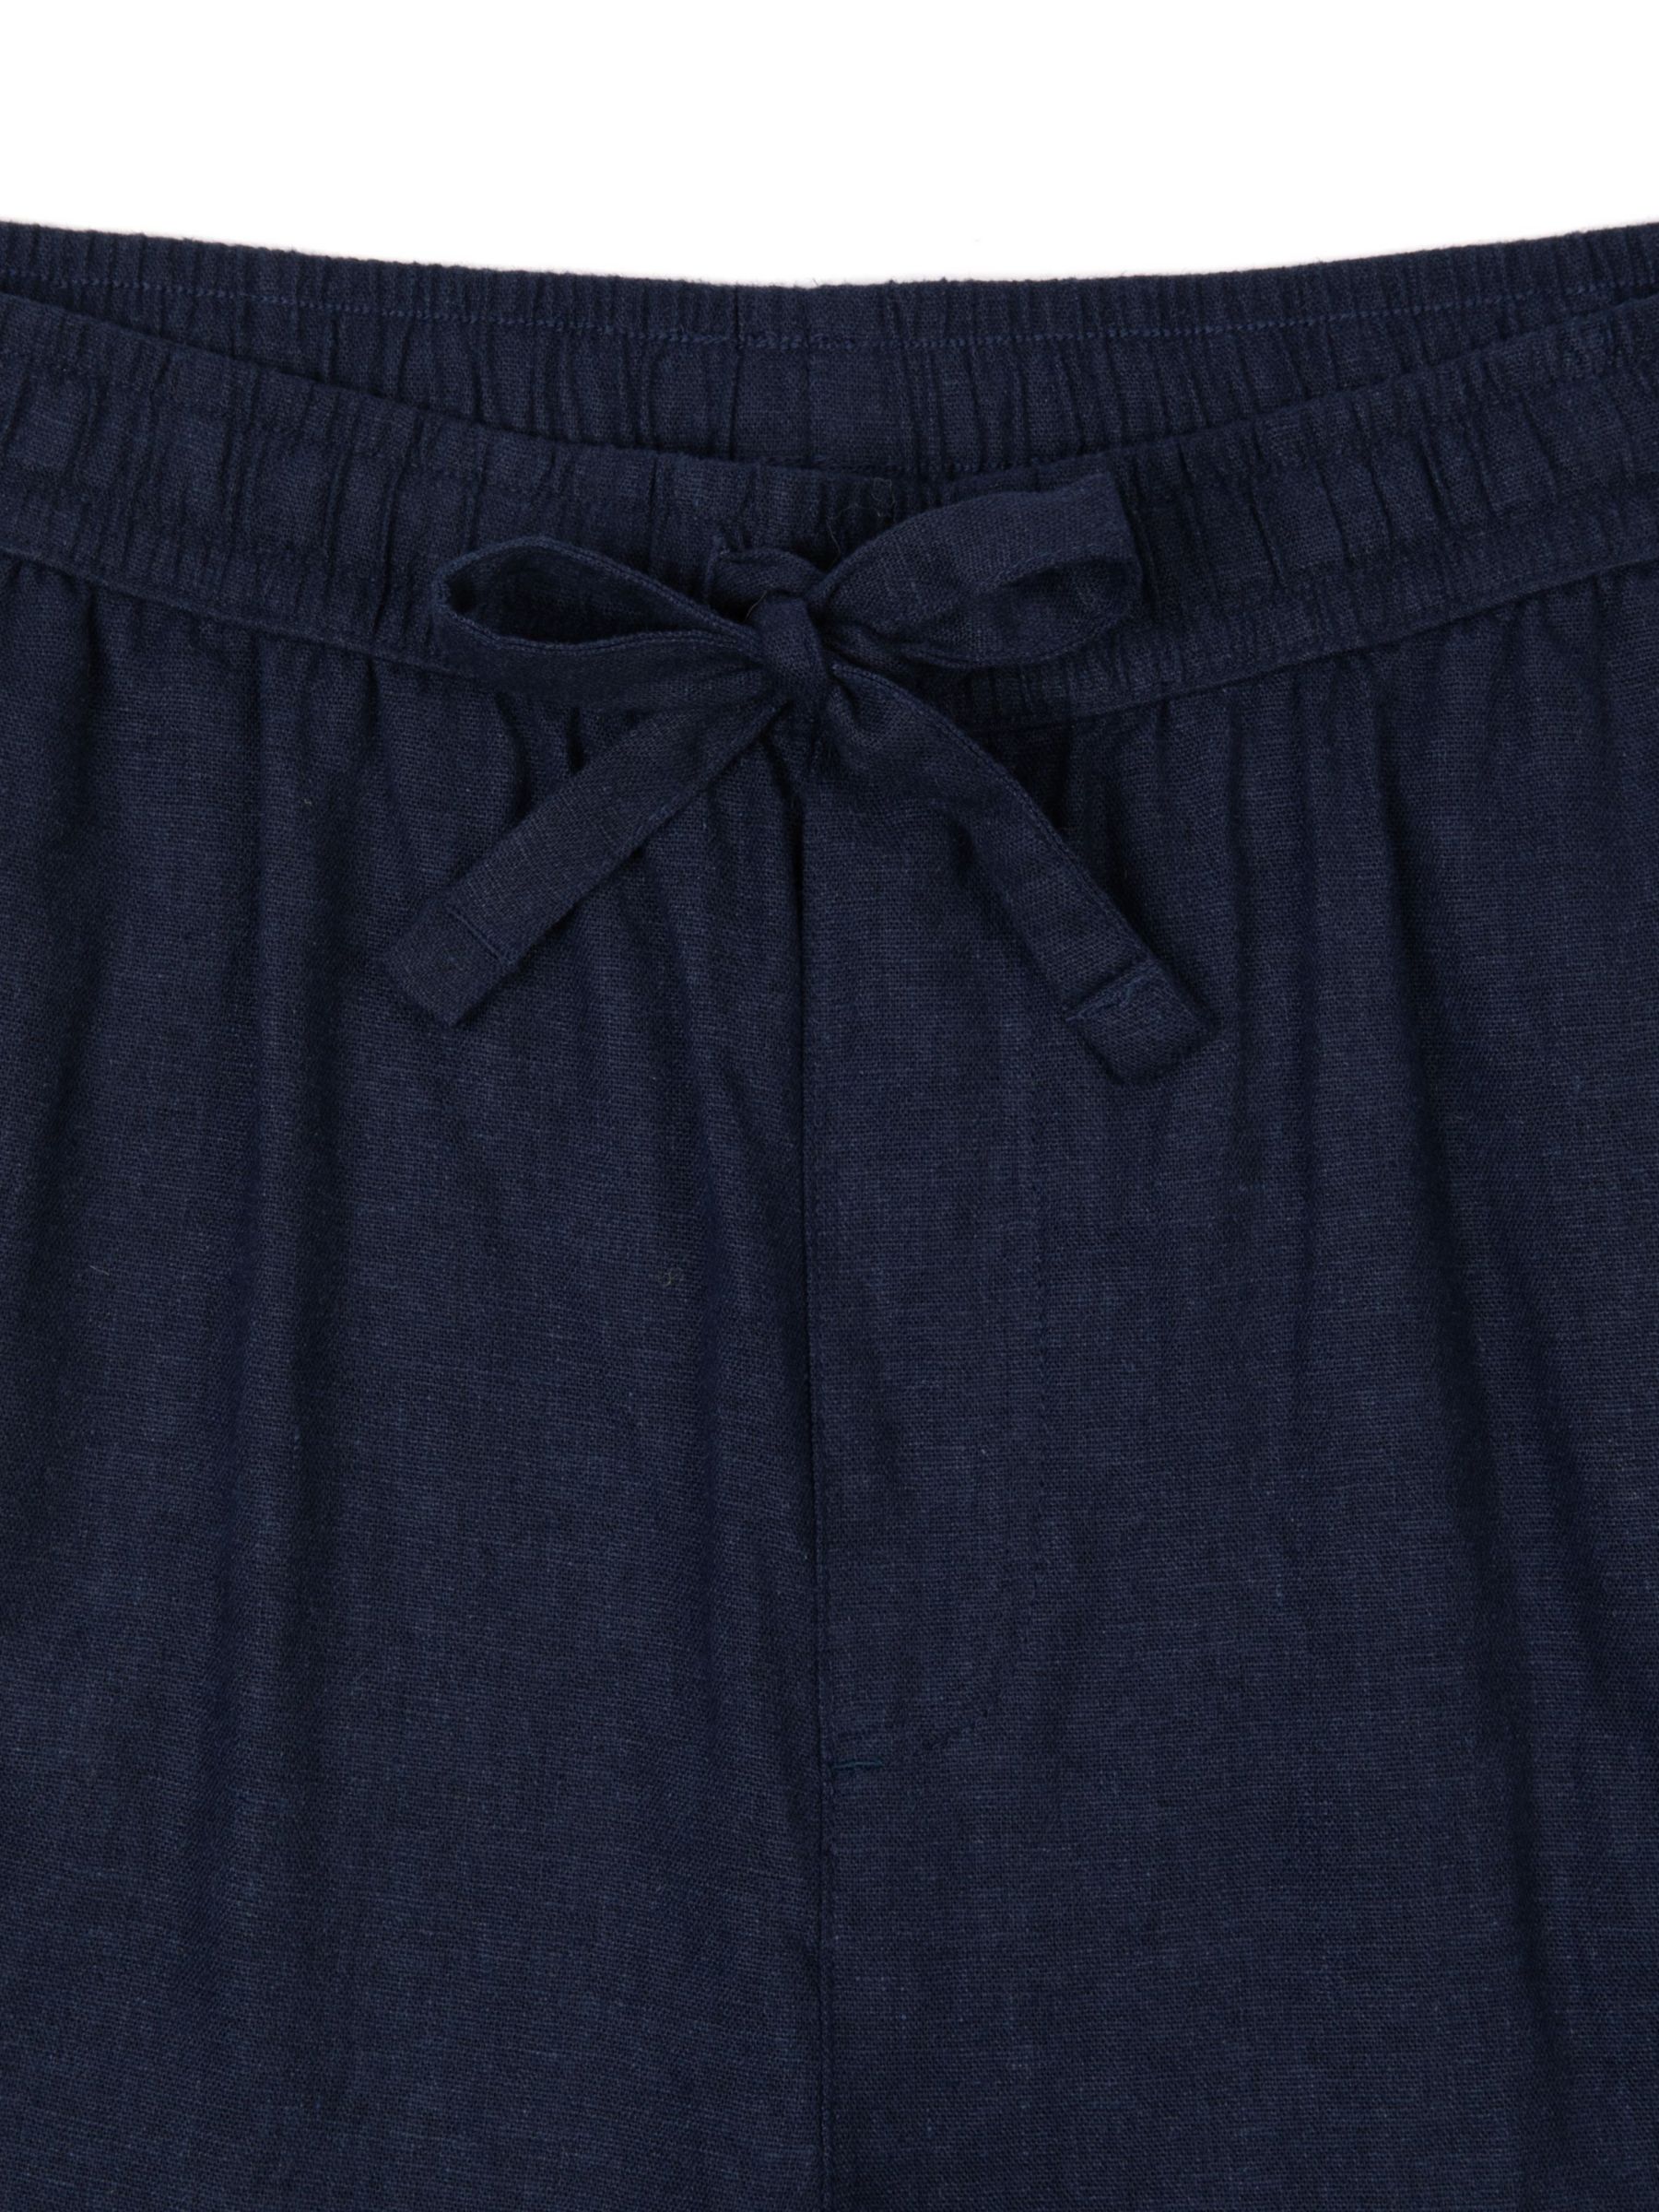 Chelsea Peers Linen Blend Relaxed Trousers, Navy, L